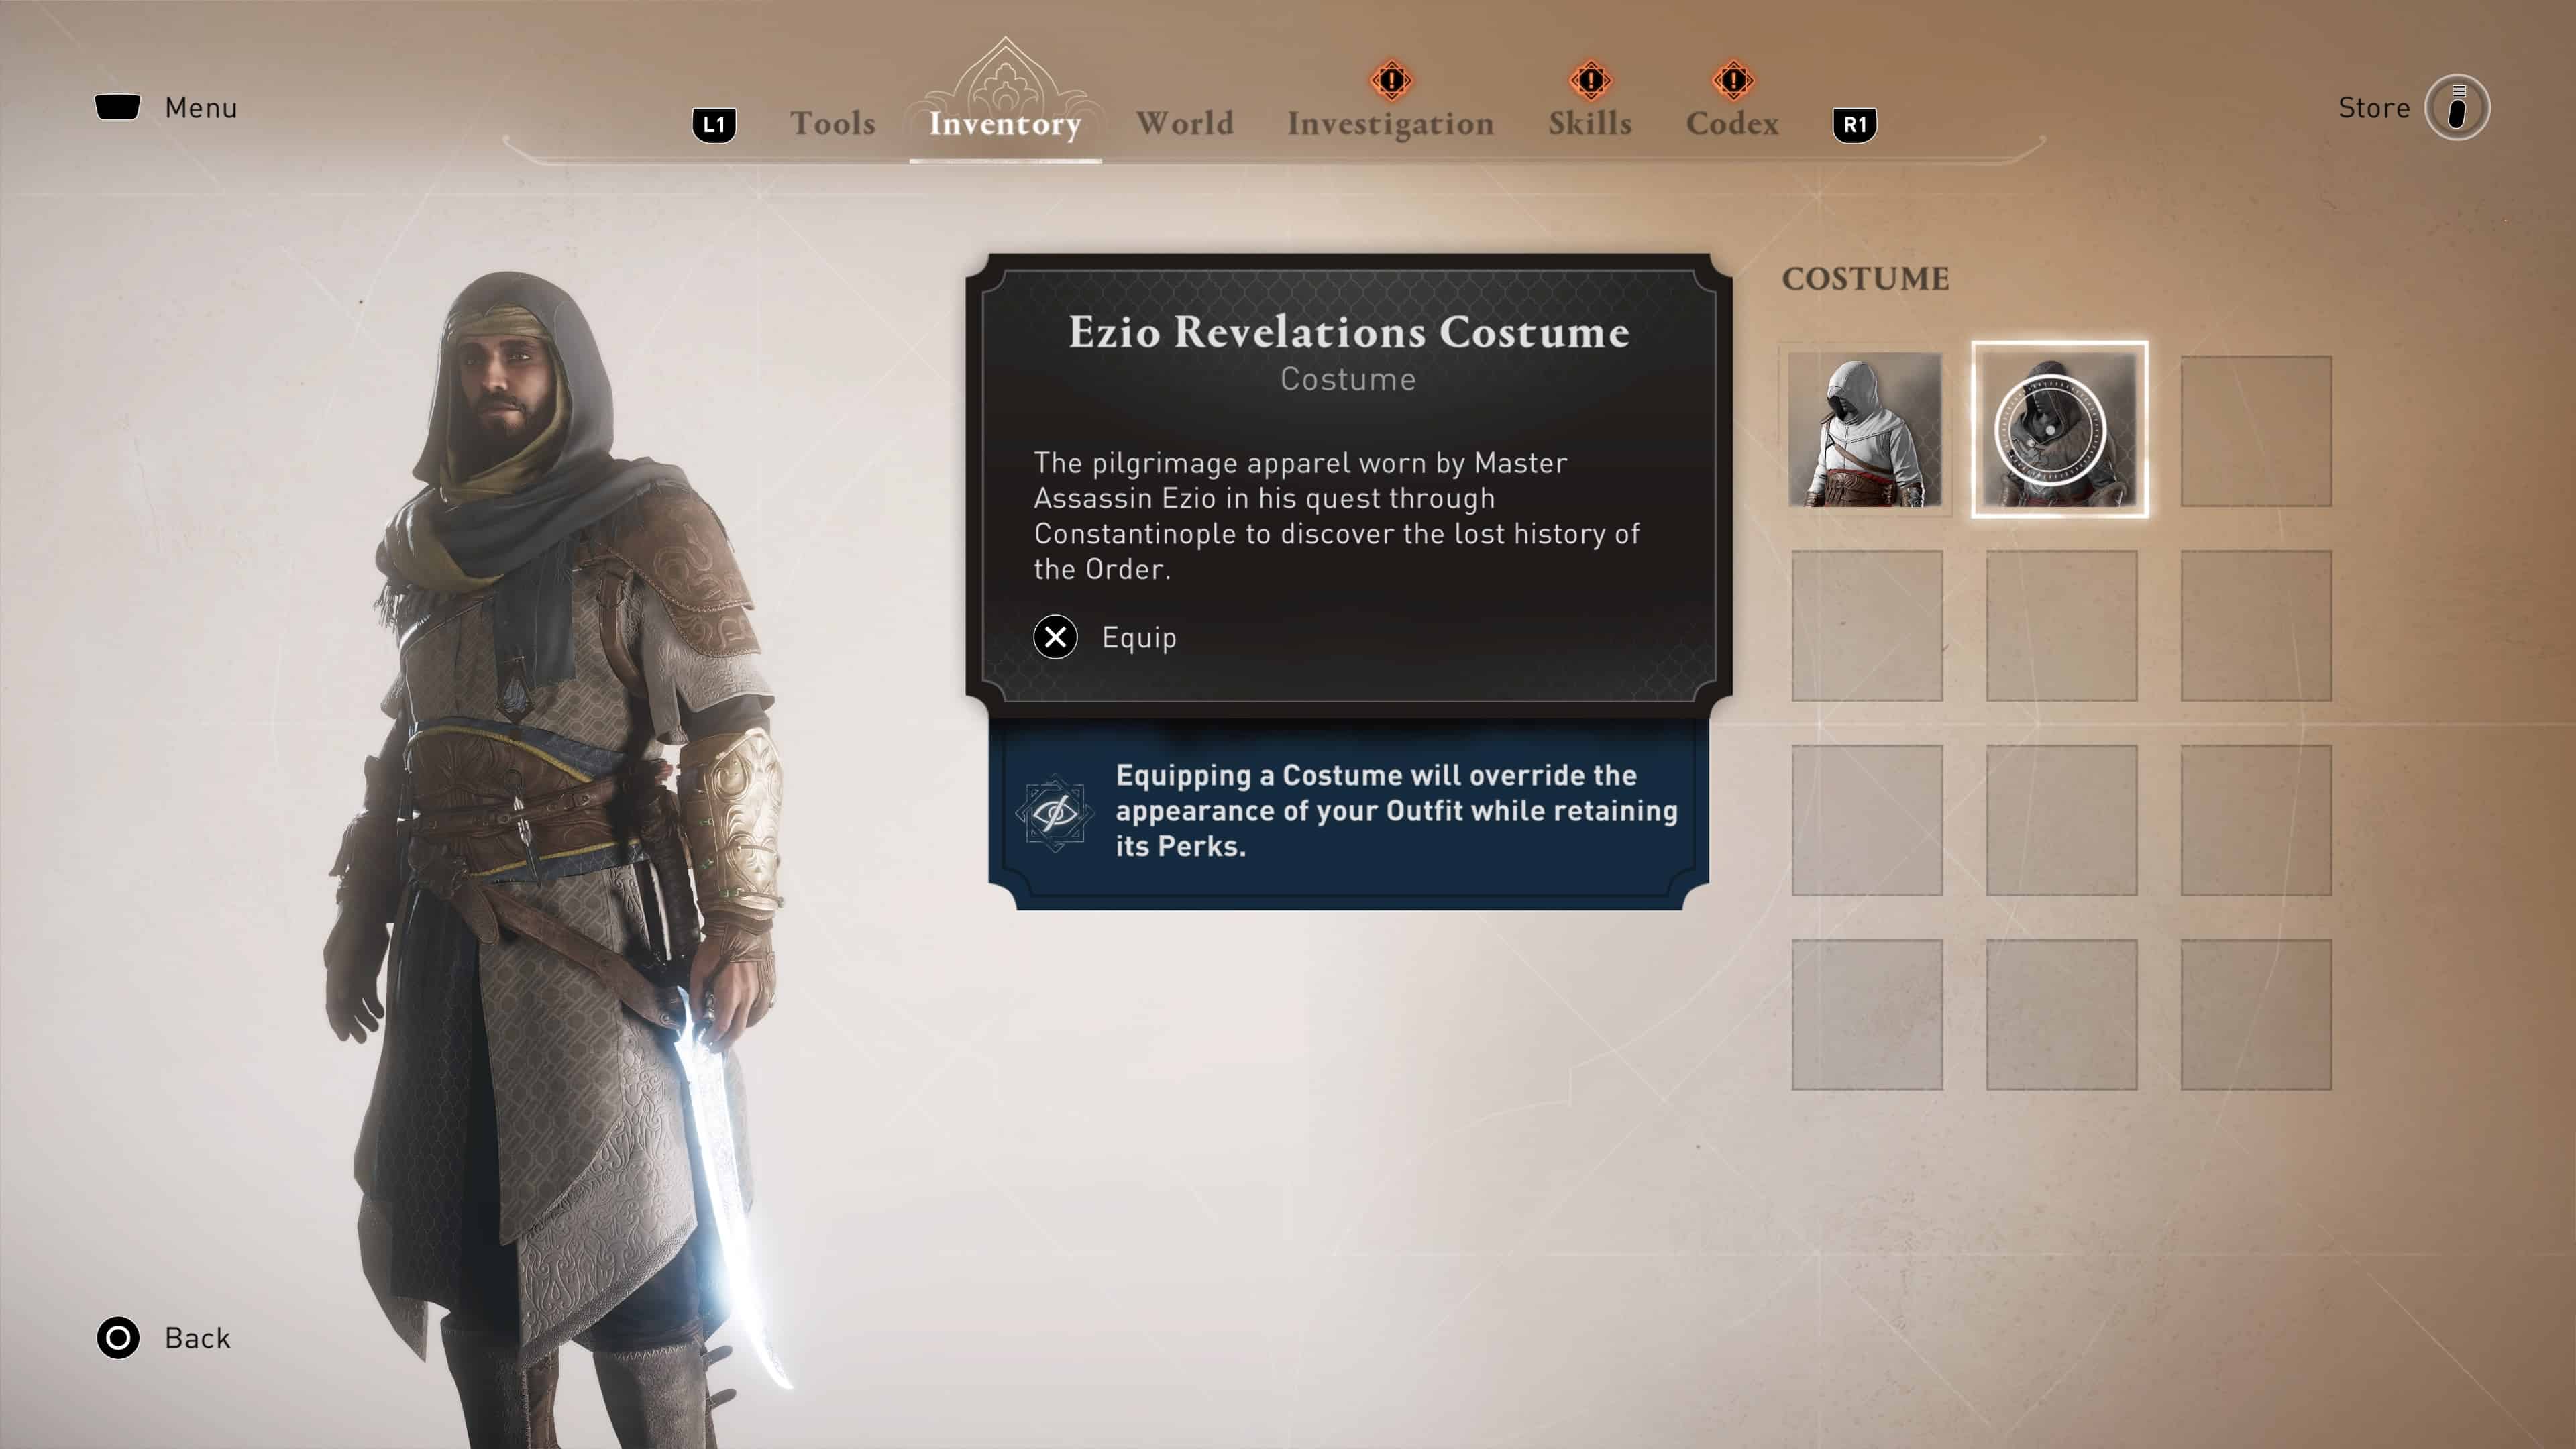 Assassin's Creed Mirage costumes - Basim in the menu showing Costumes.